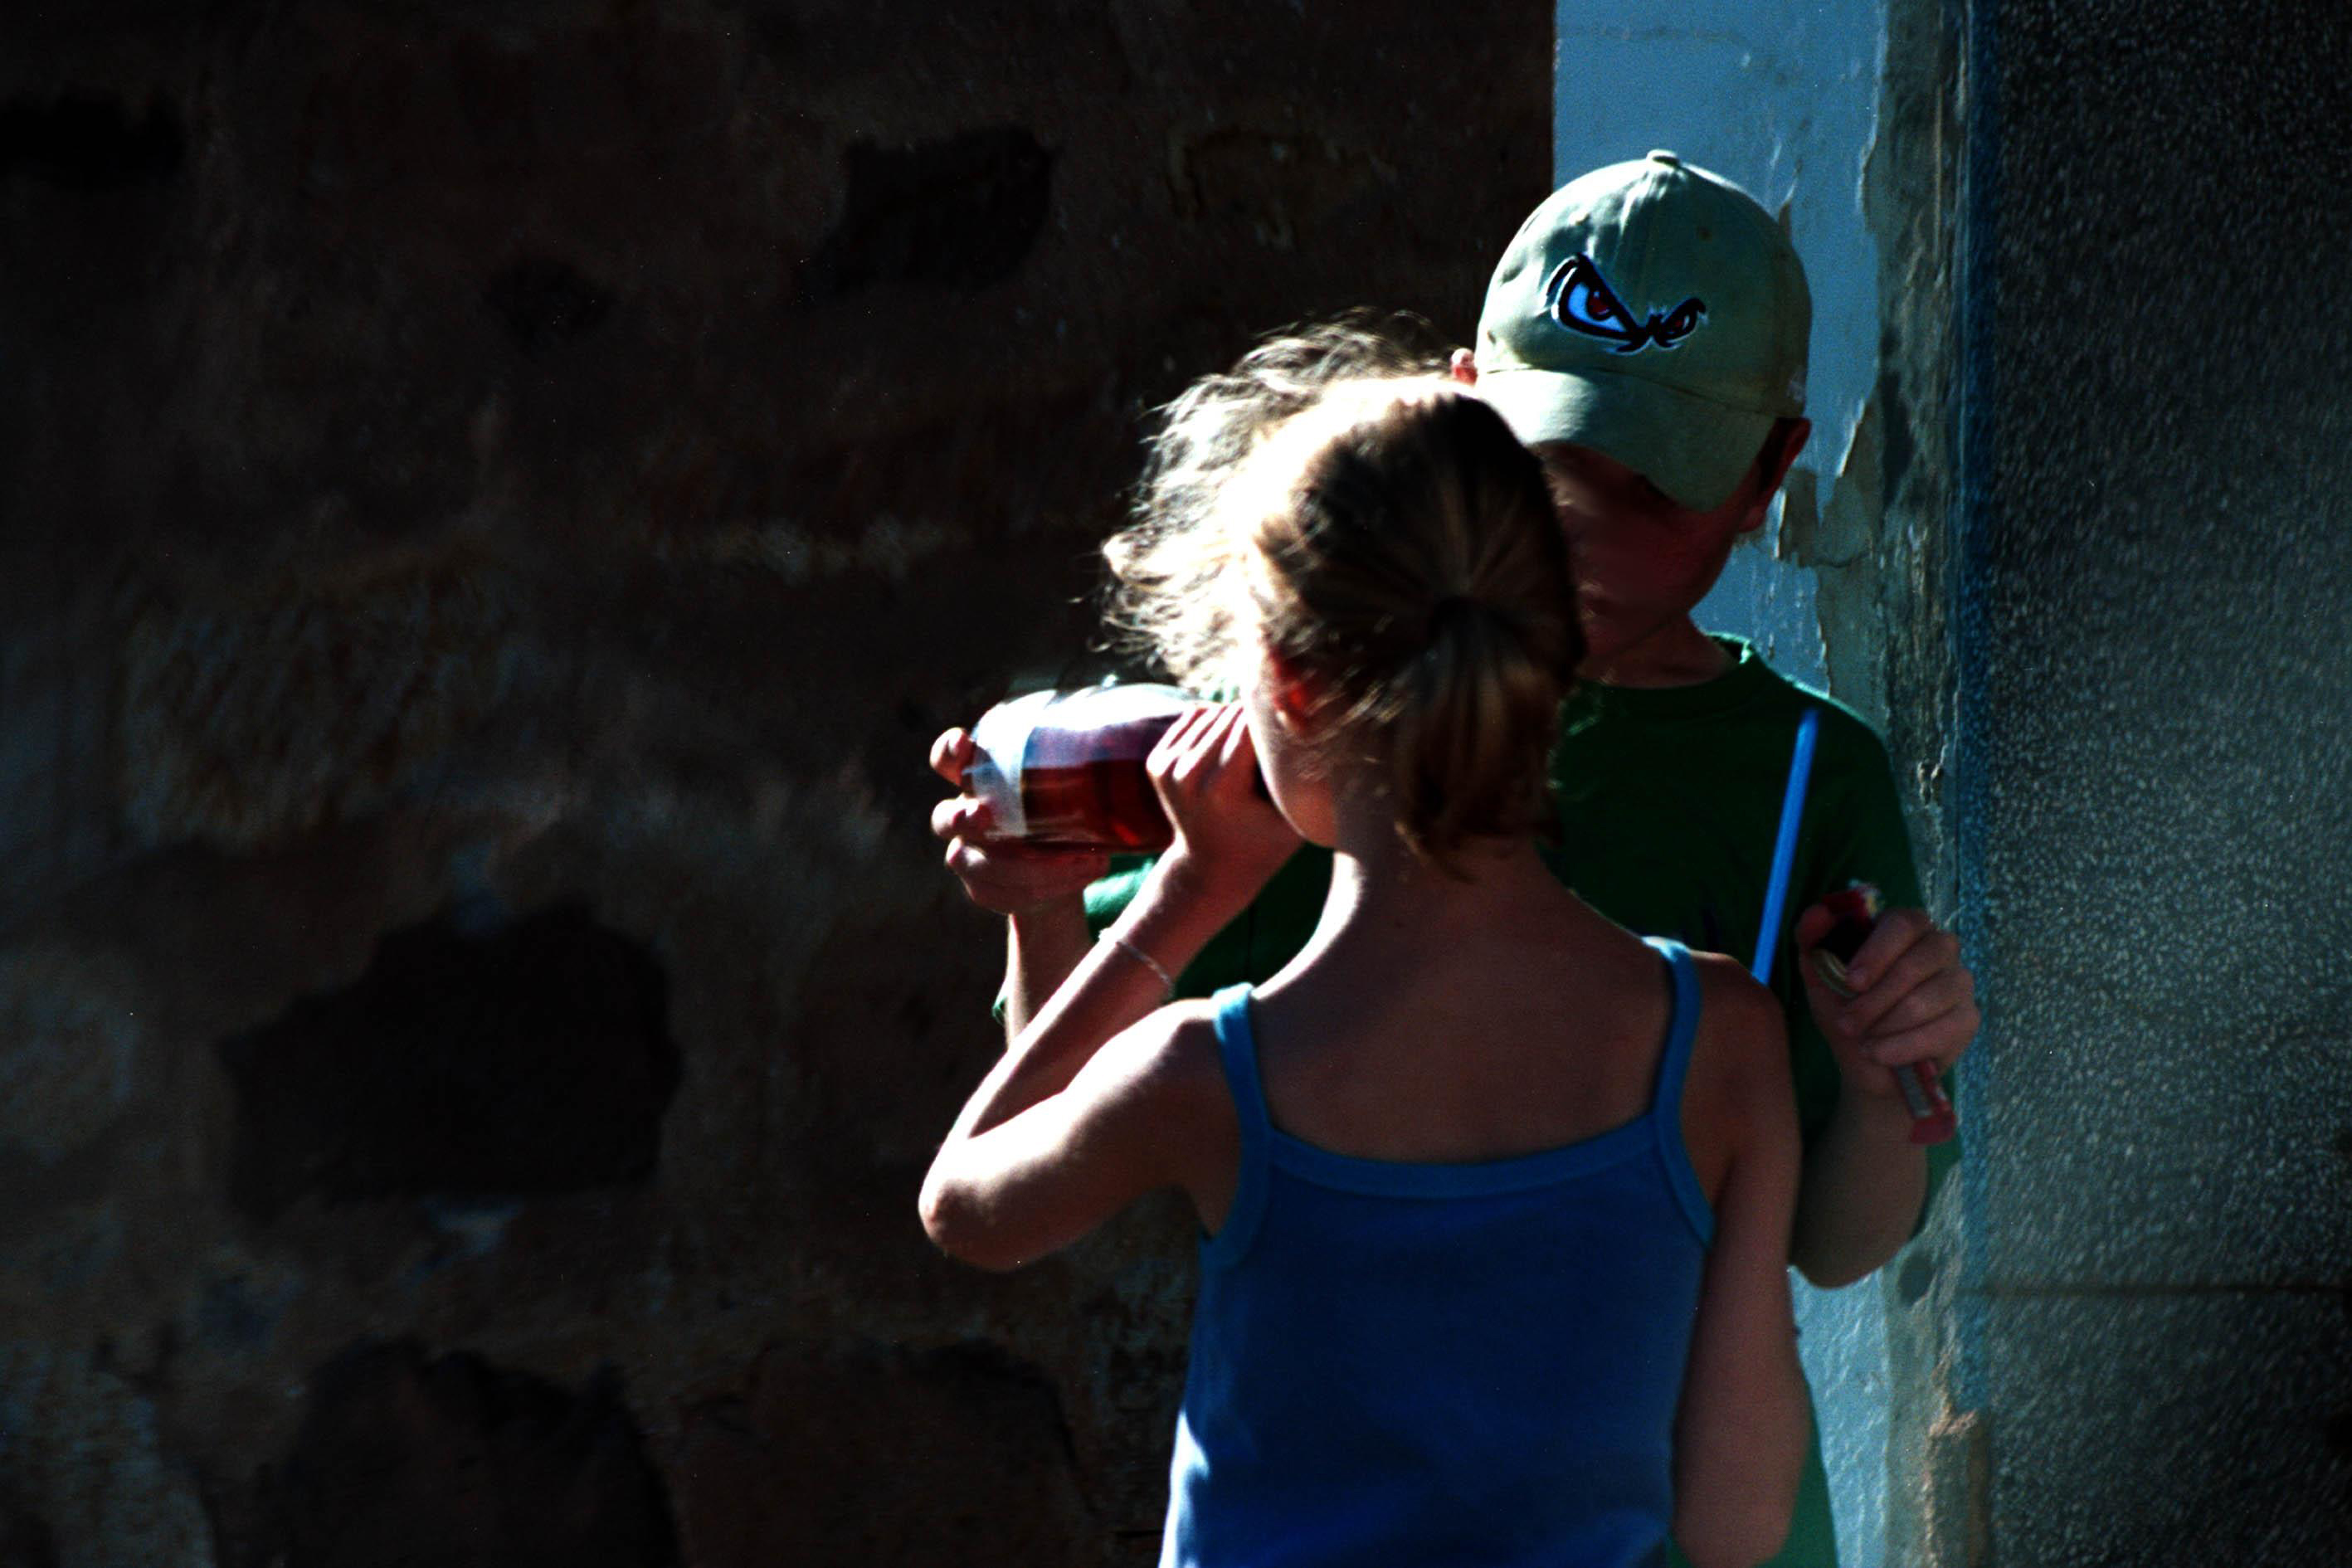 Young boy giving a bottle of wine to a young girl